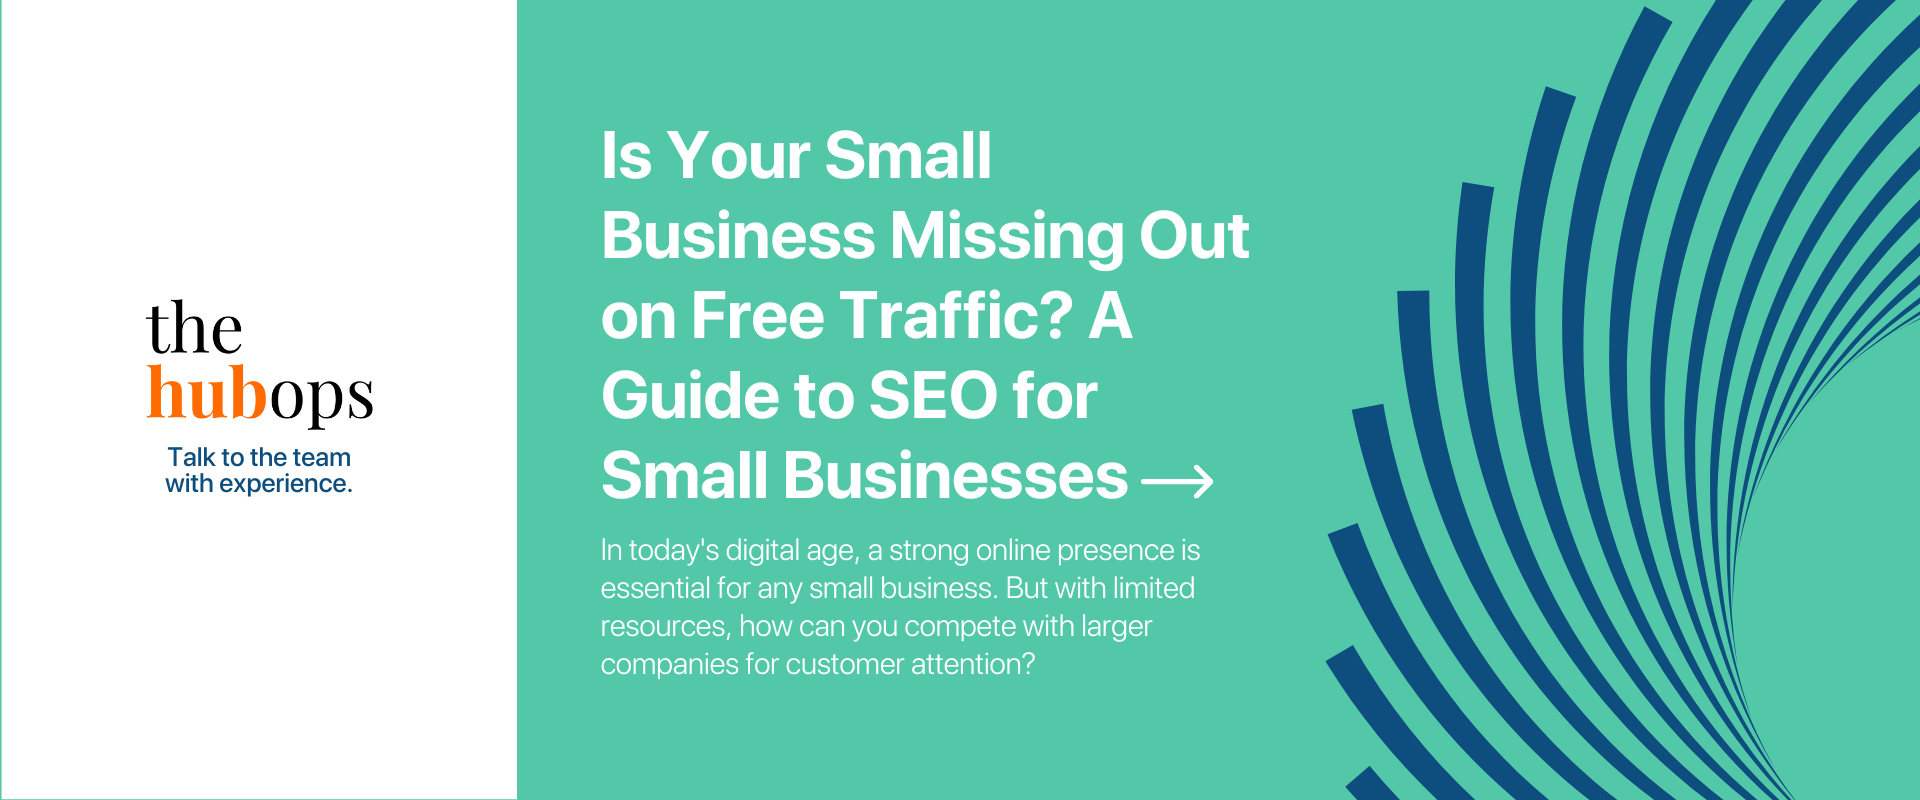 SEO for Small Businesses - The HubOps